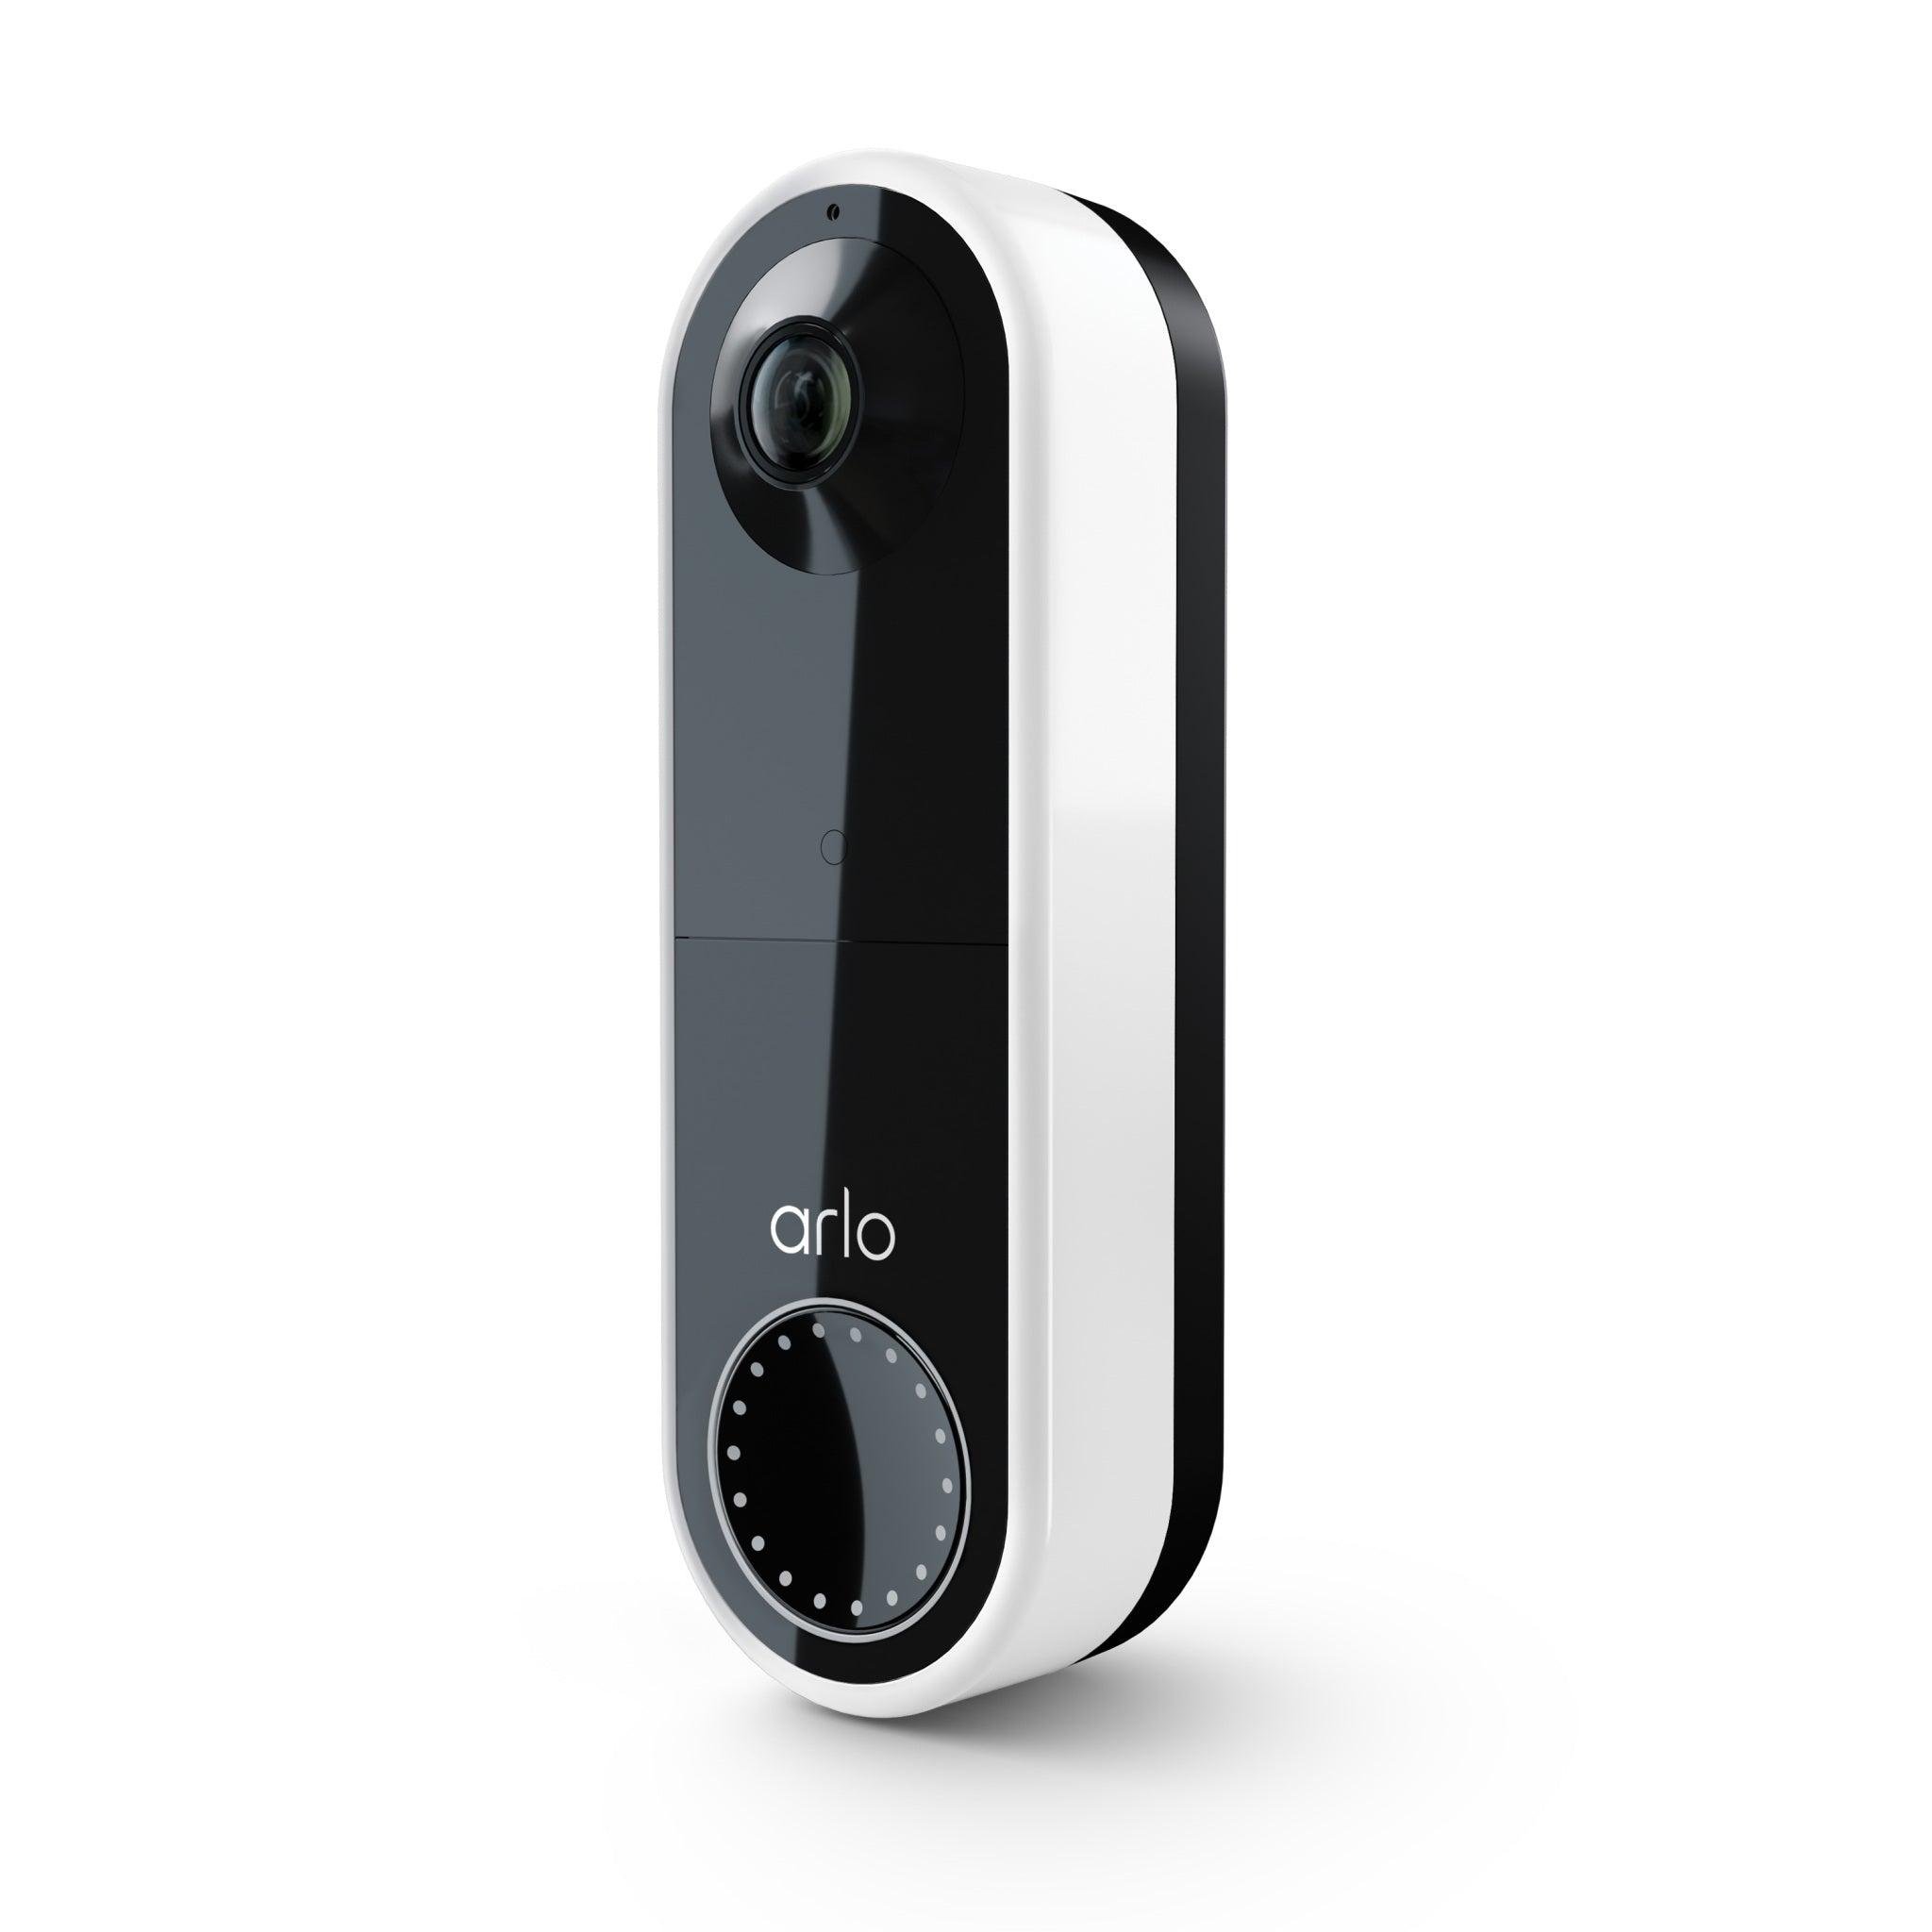 Arlo AVD2001-100NAR Essential Wire-Free, HD Video, 180° View, Night Vision, Video Doorbell White - Certified Refurbished